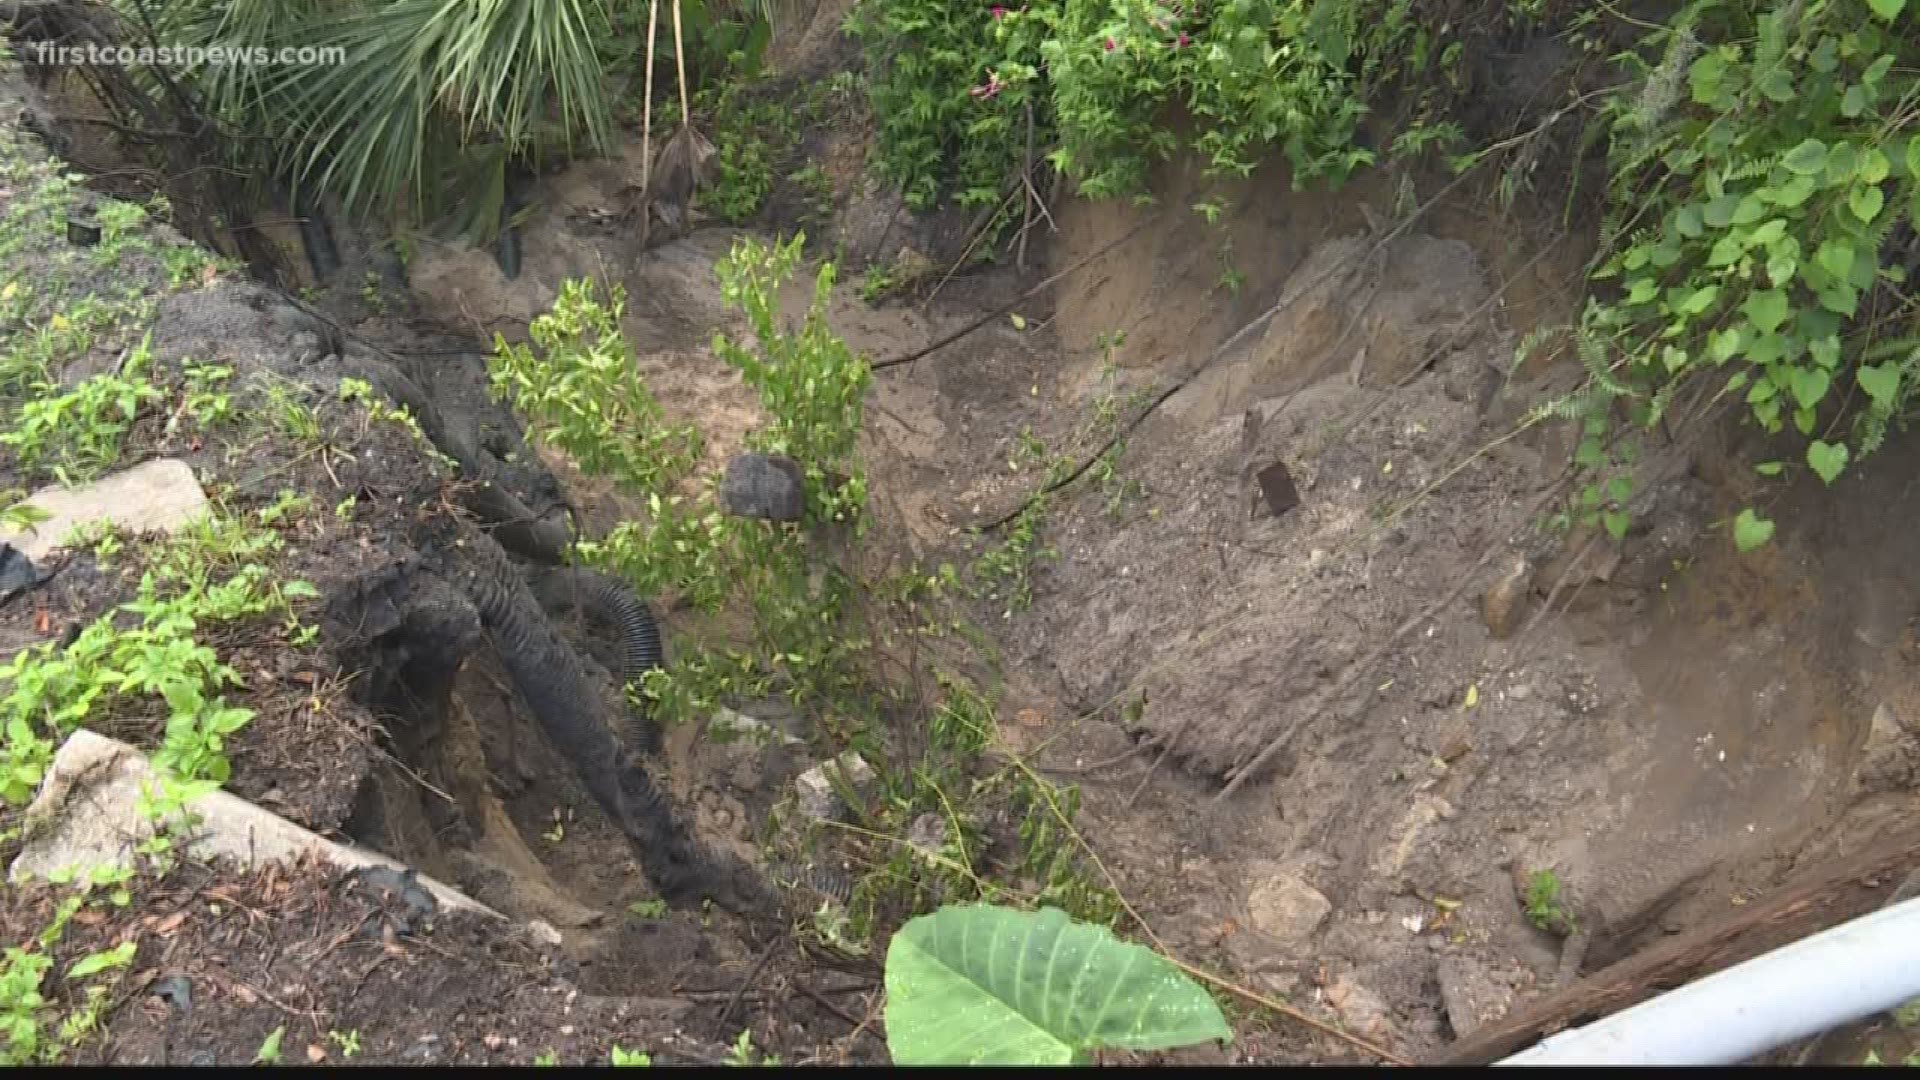 The family said they had issues with flooding in the past, but say this erosion is "something else."